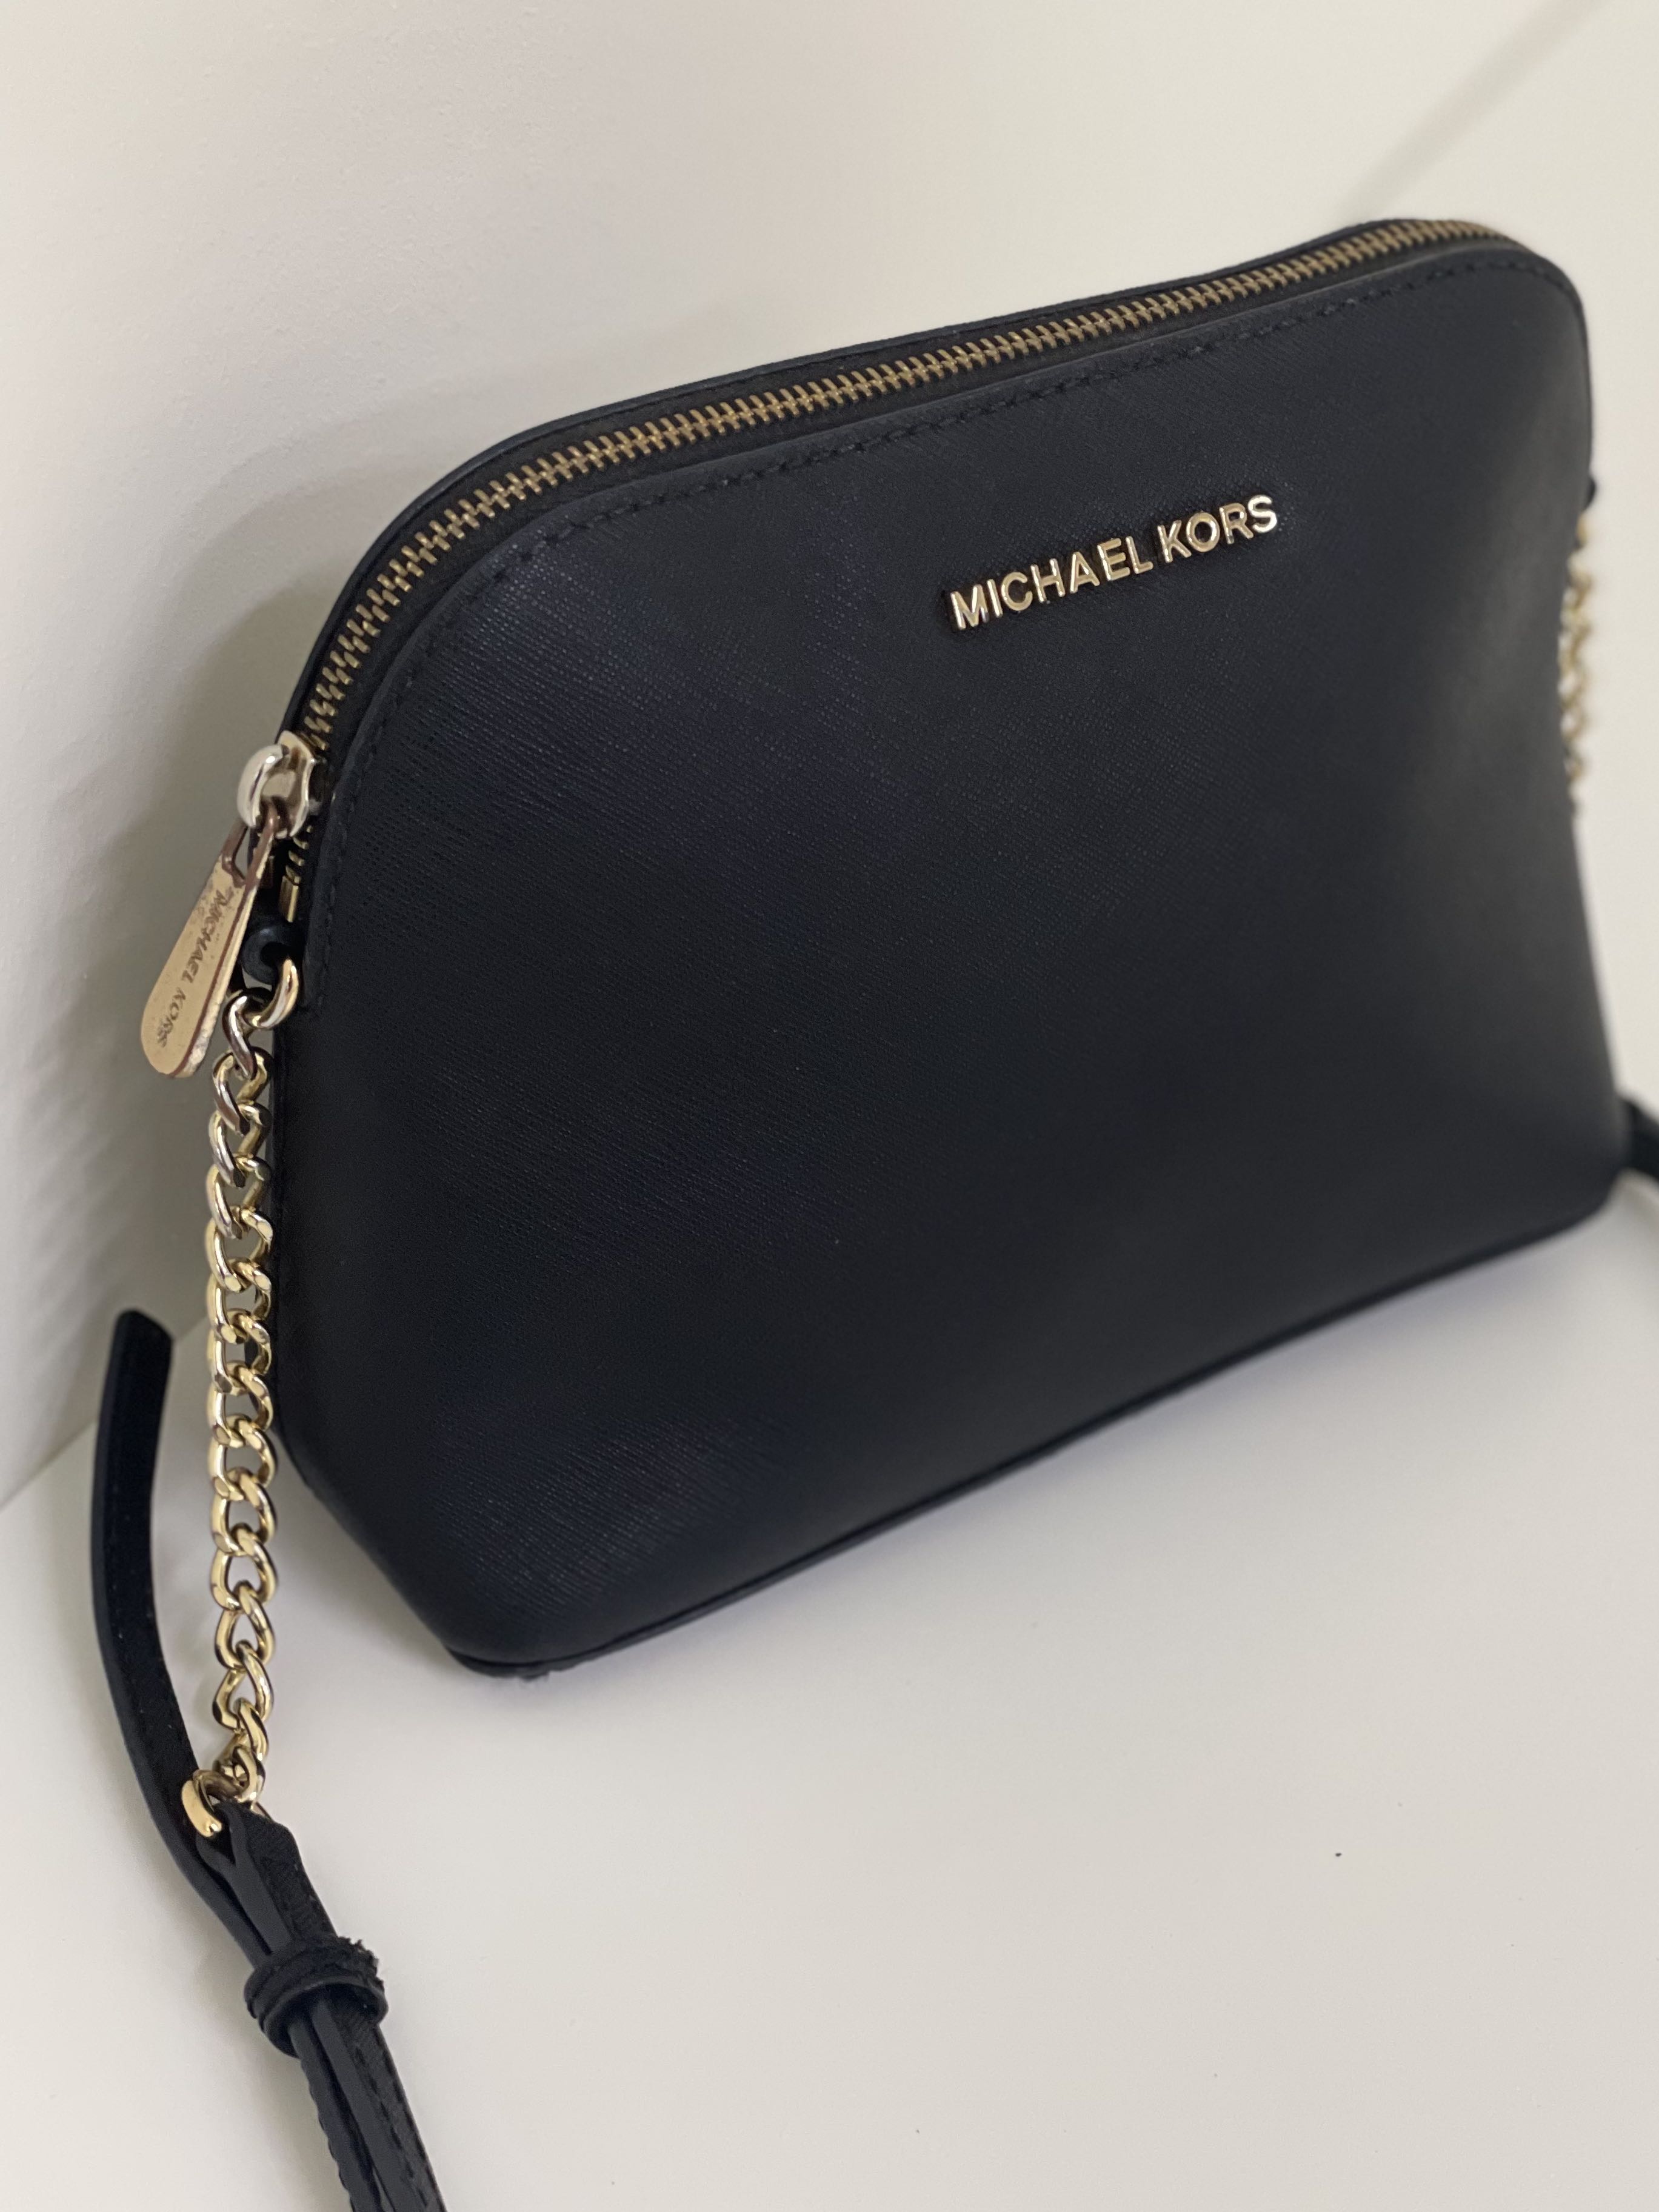 MK Michael Kors Cindy Dome Crossbody Bag Black Saffiano Leather, Women's  Fashion, Bags & Wallets, Cross-body Bags on Carousell